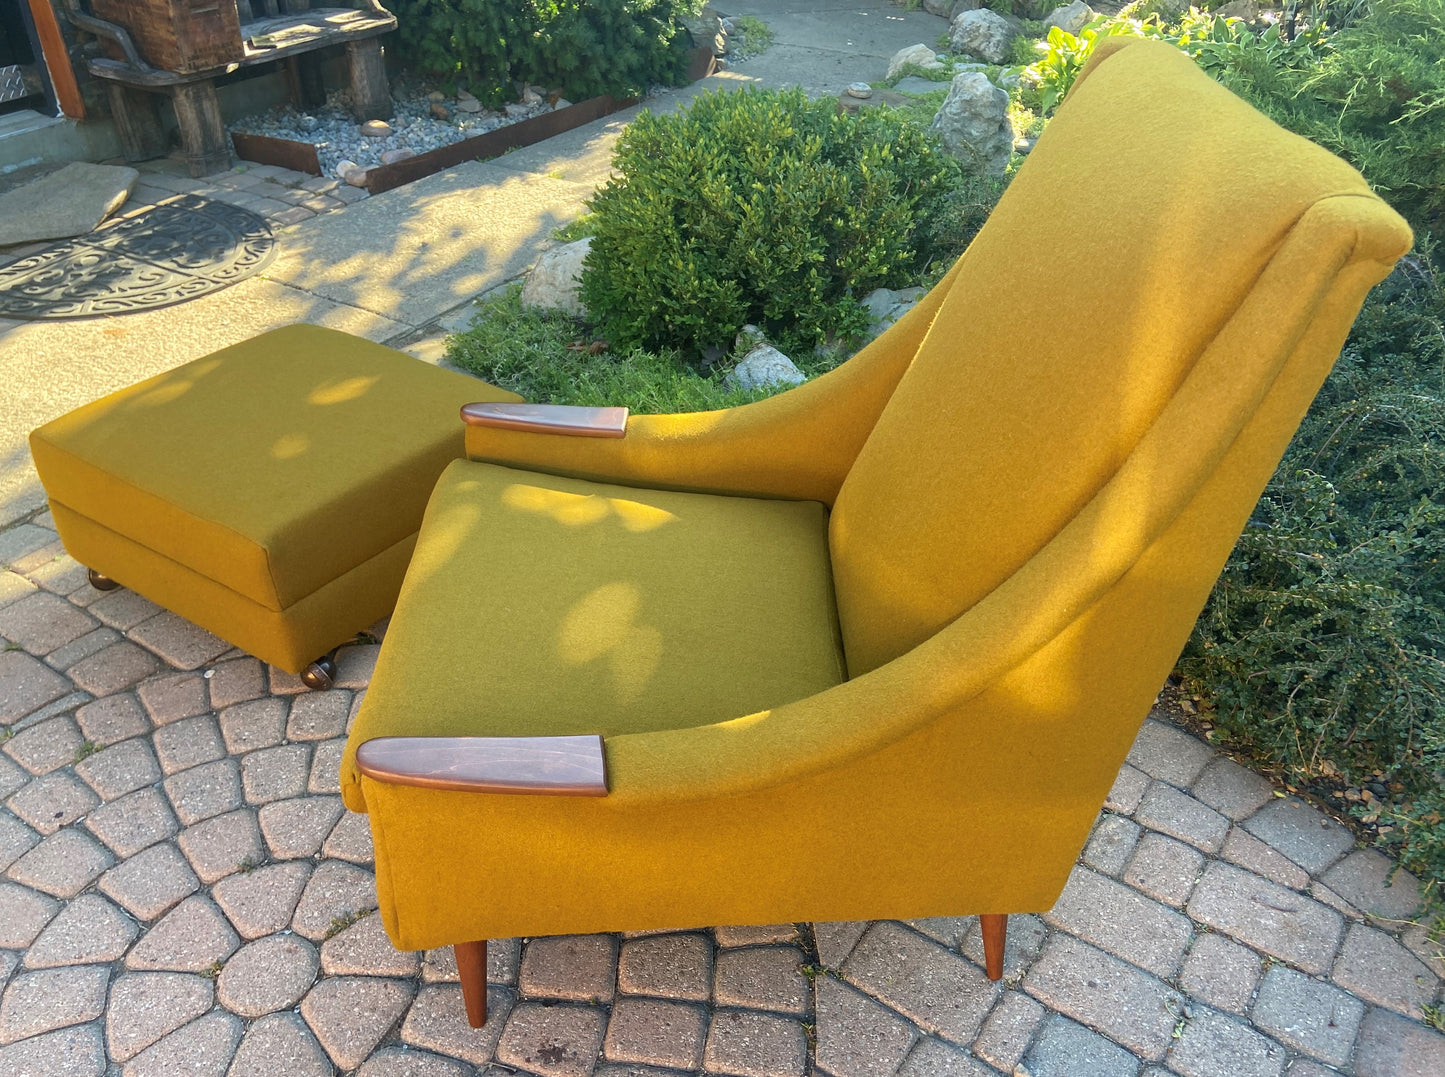 REFINISHED REUPHOLSTERED Mid Century Modern armchair & ottoman